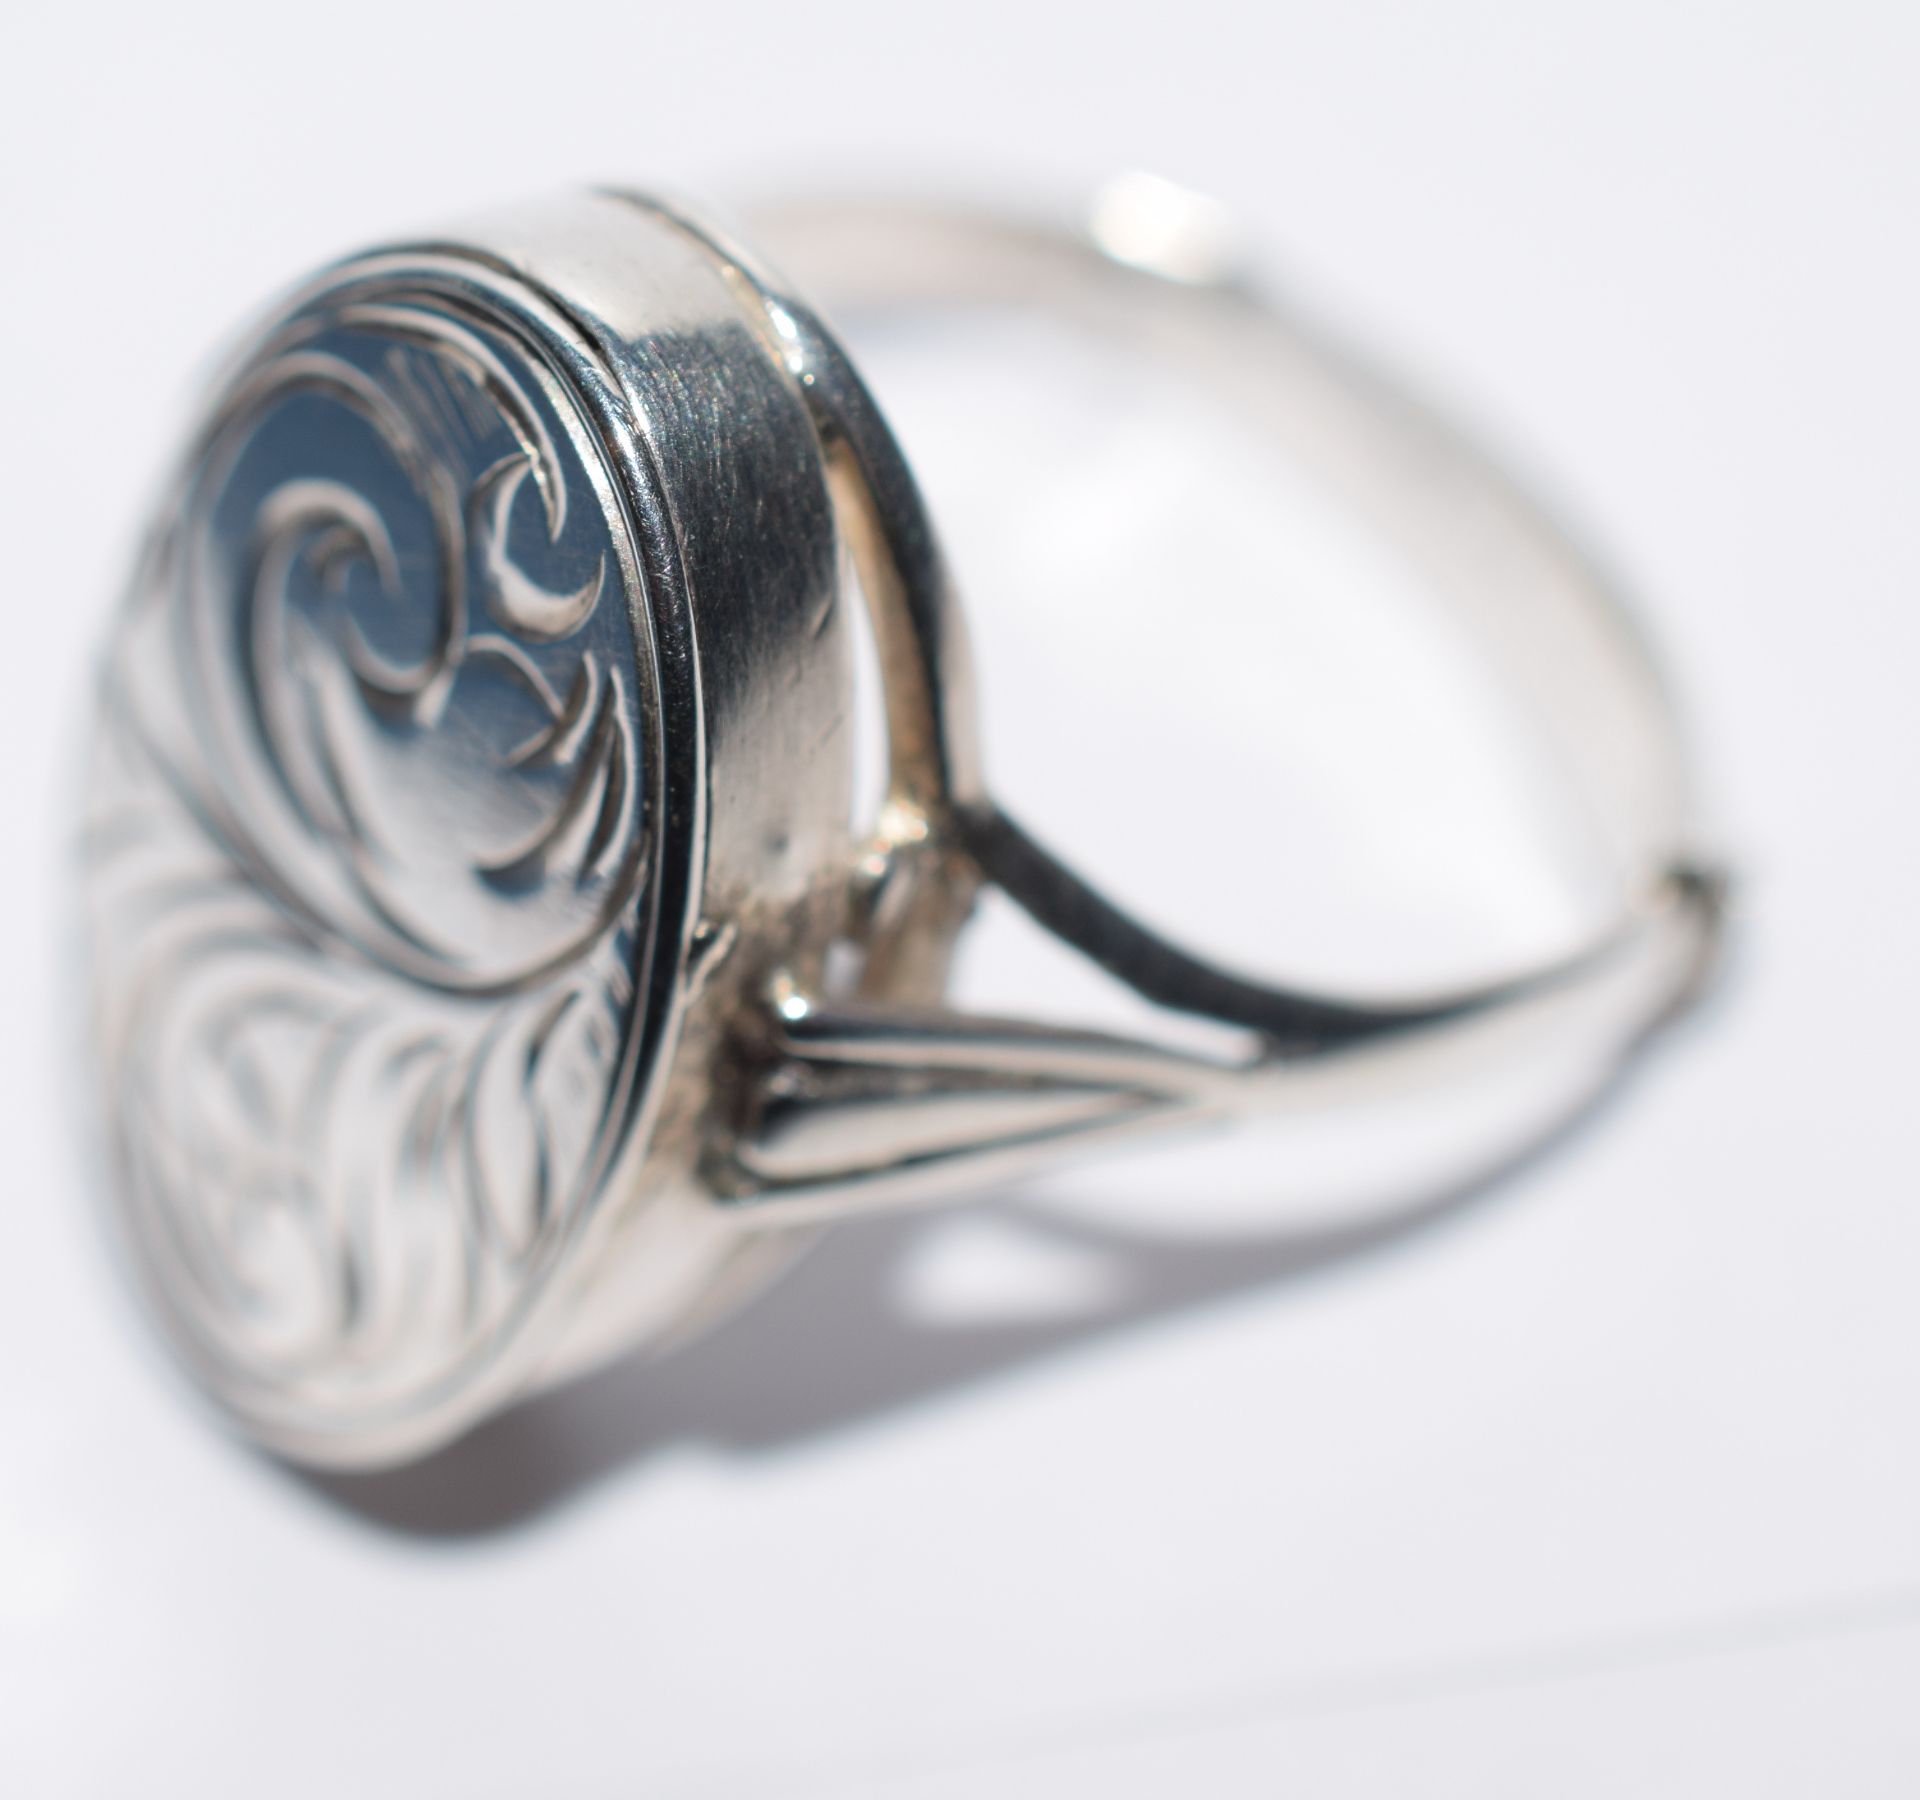 Silver Locket/Poison Ring NO RESERVE - Image 4 of 8